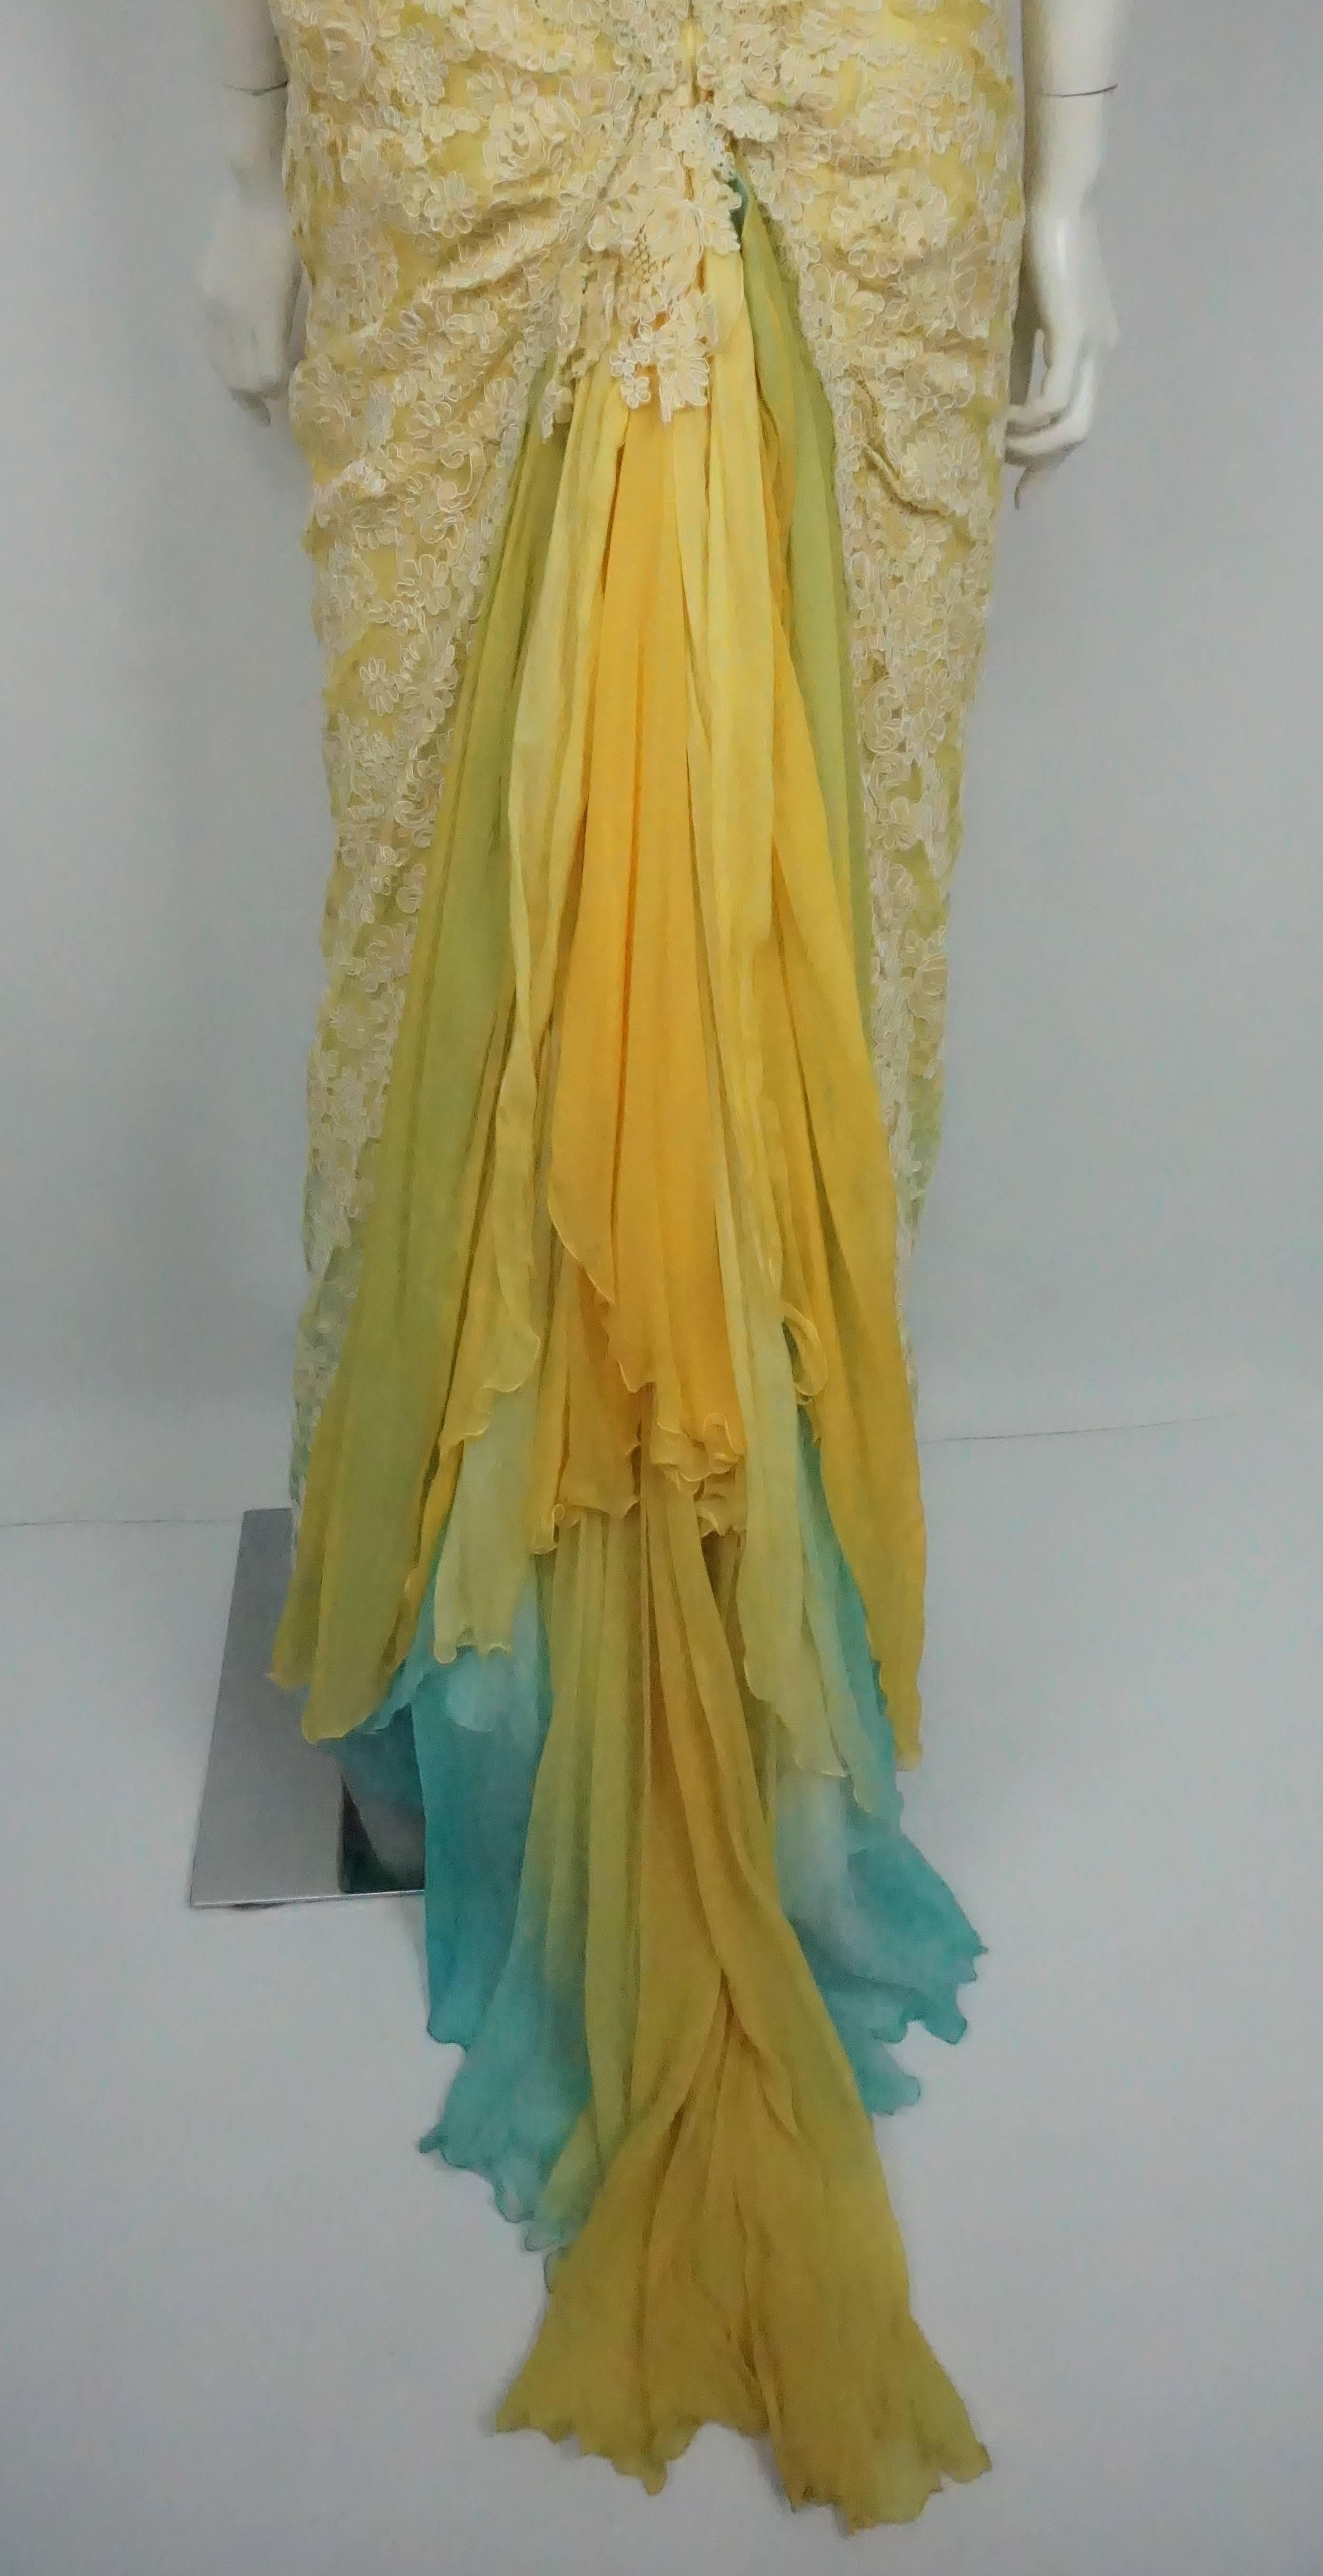 Women's Vickey Tiel Couture Yellow & Turquoise Lace and Silk Gown w/ Shawl - 6 